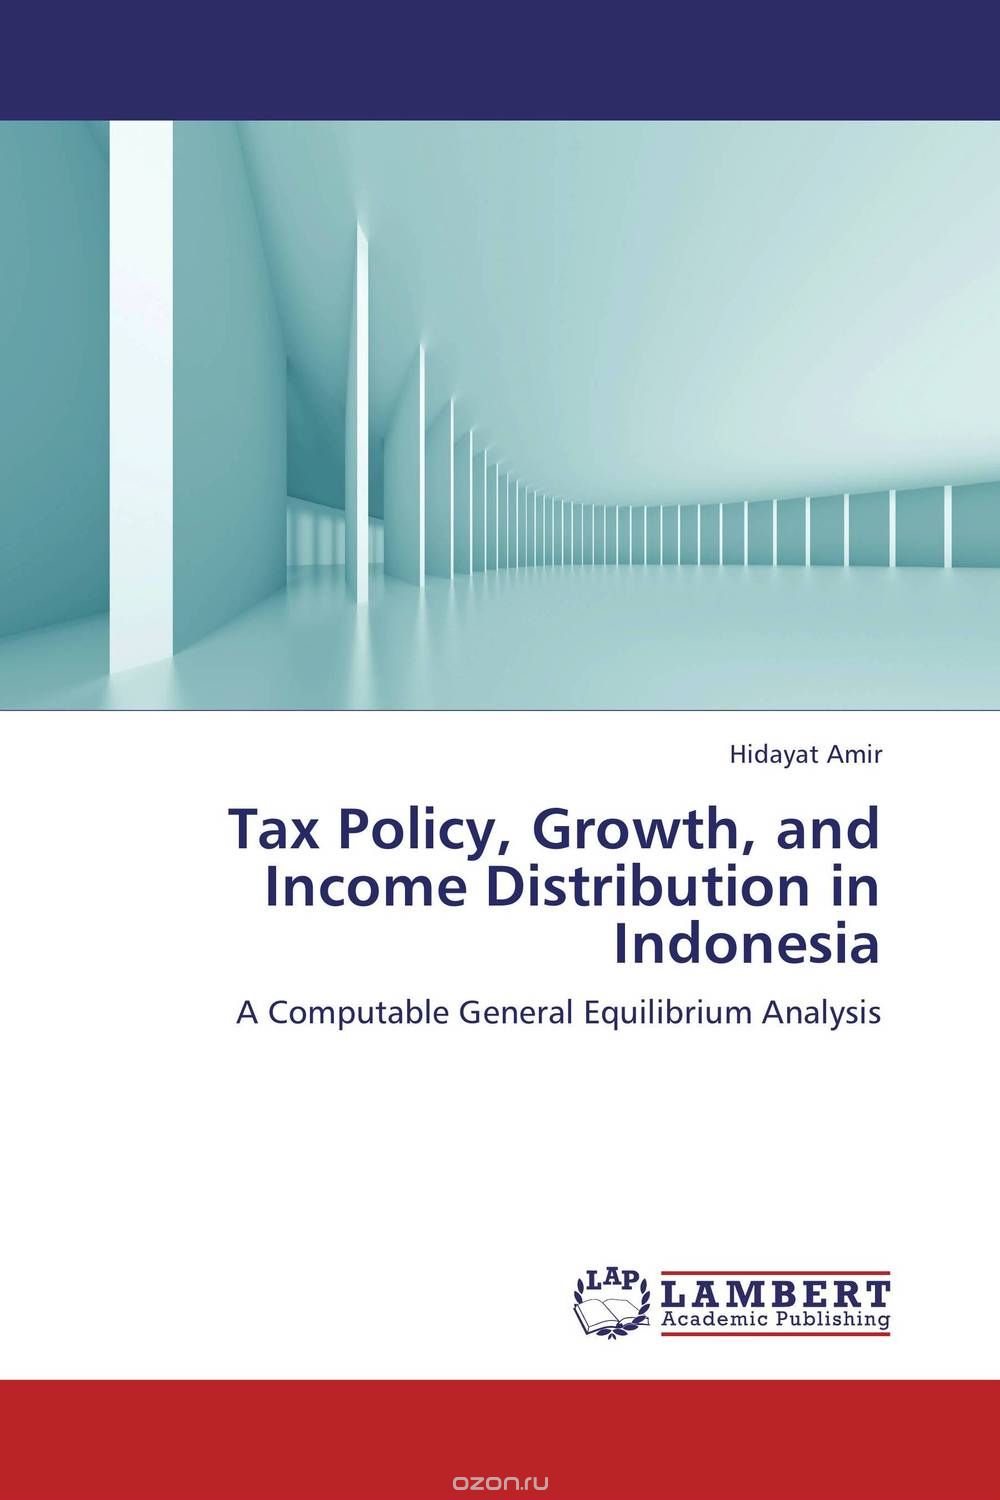 Скачать книгу "Tax Policy, Growth, and Income Distribution  in Indonesia"